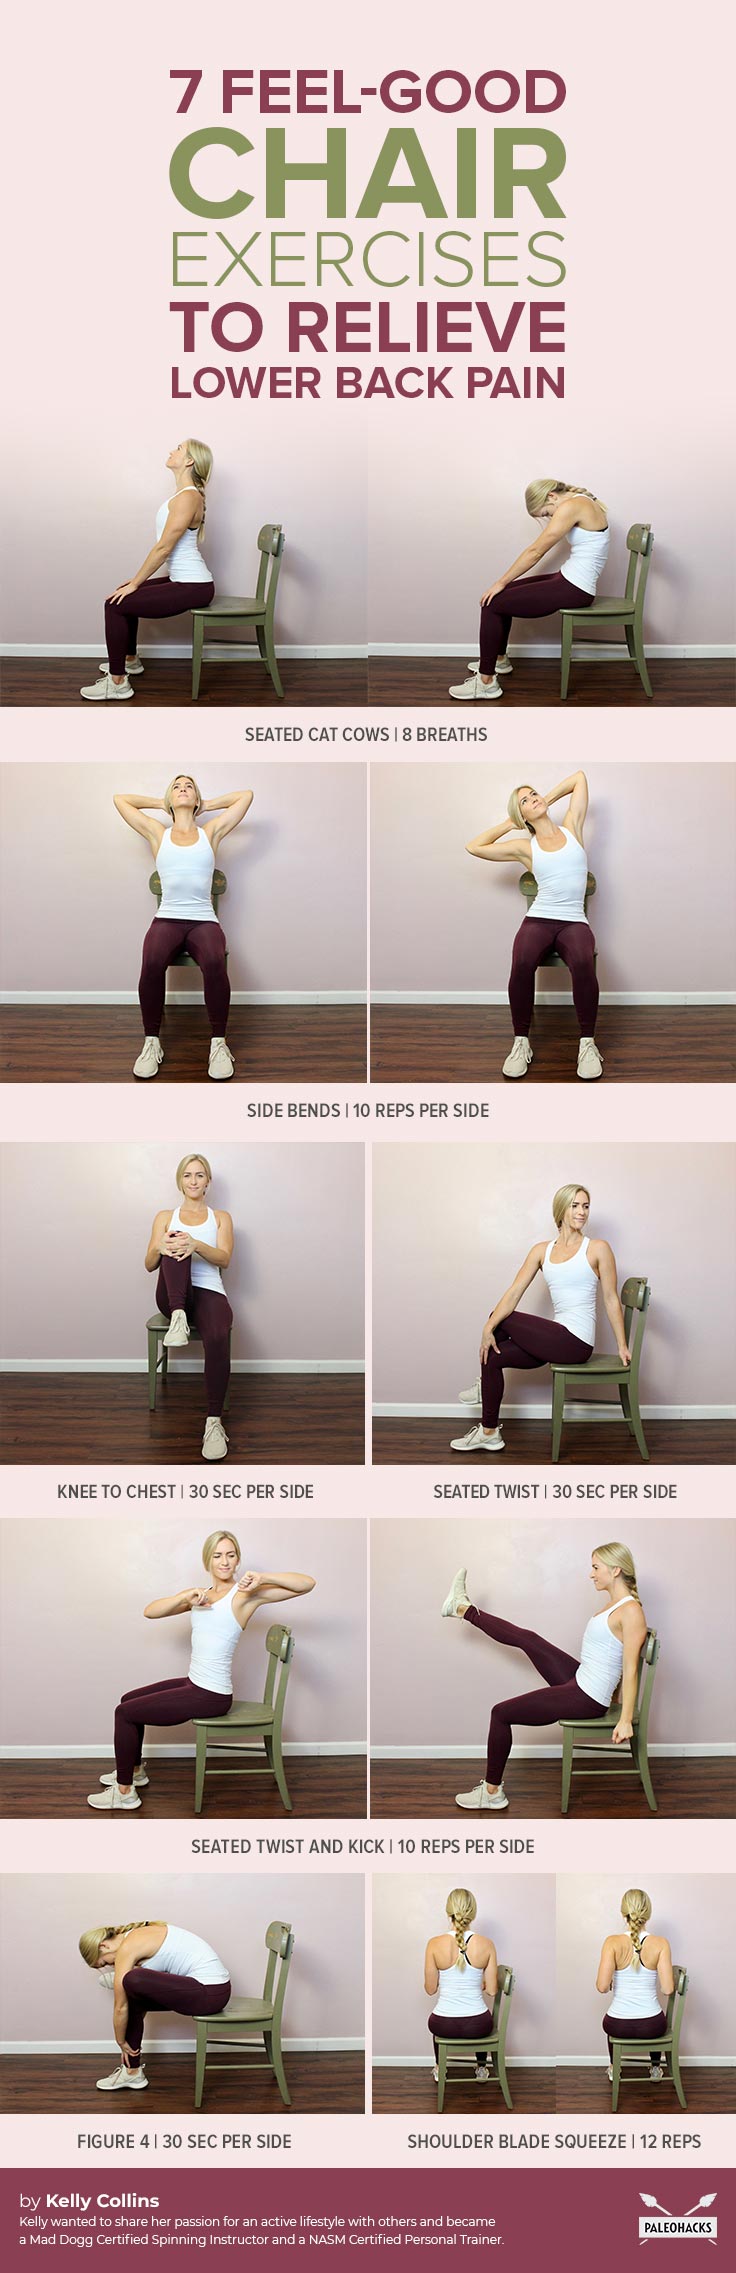 It’s literally painful to be stuck at your desk all day. Relieve that lower back pain with these stretches you can do right in your chair!